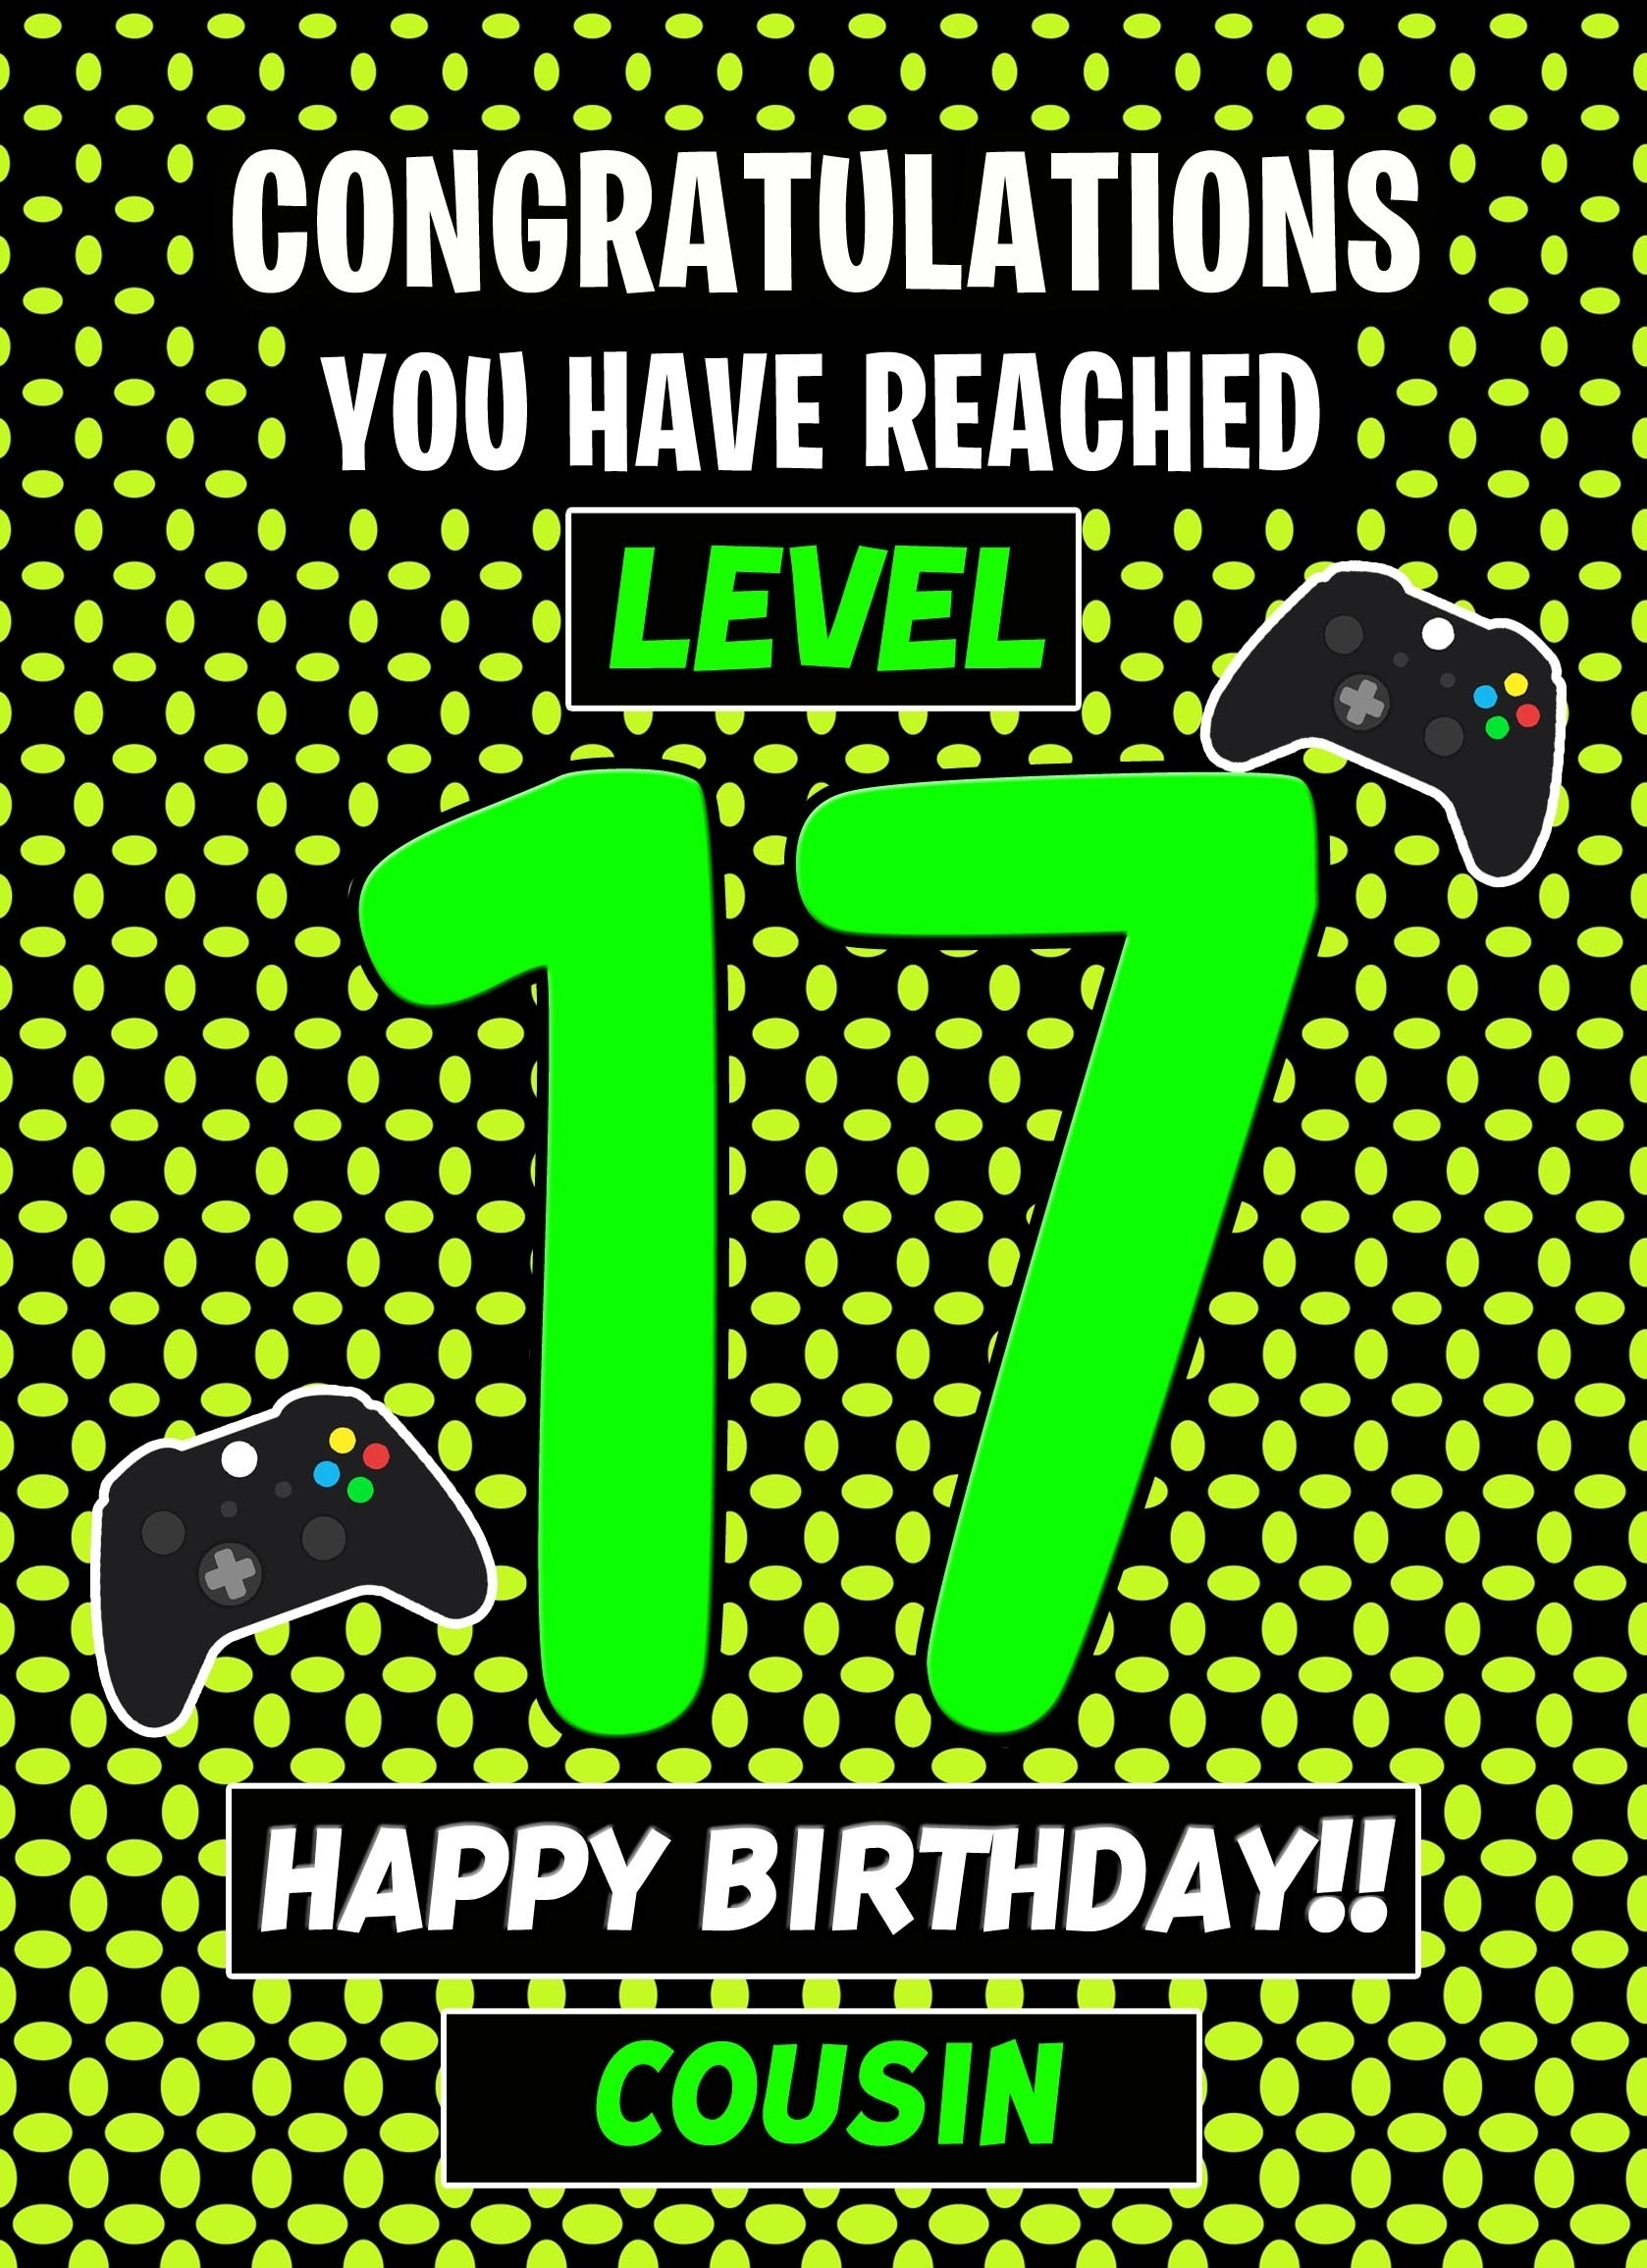 Cousin 17th Birthday Card (Level Up Gamer)